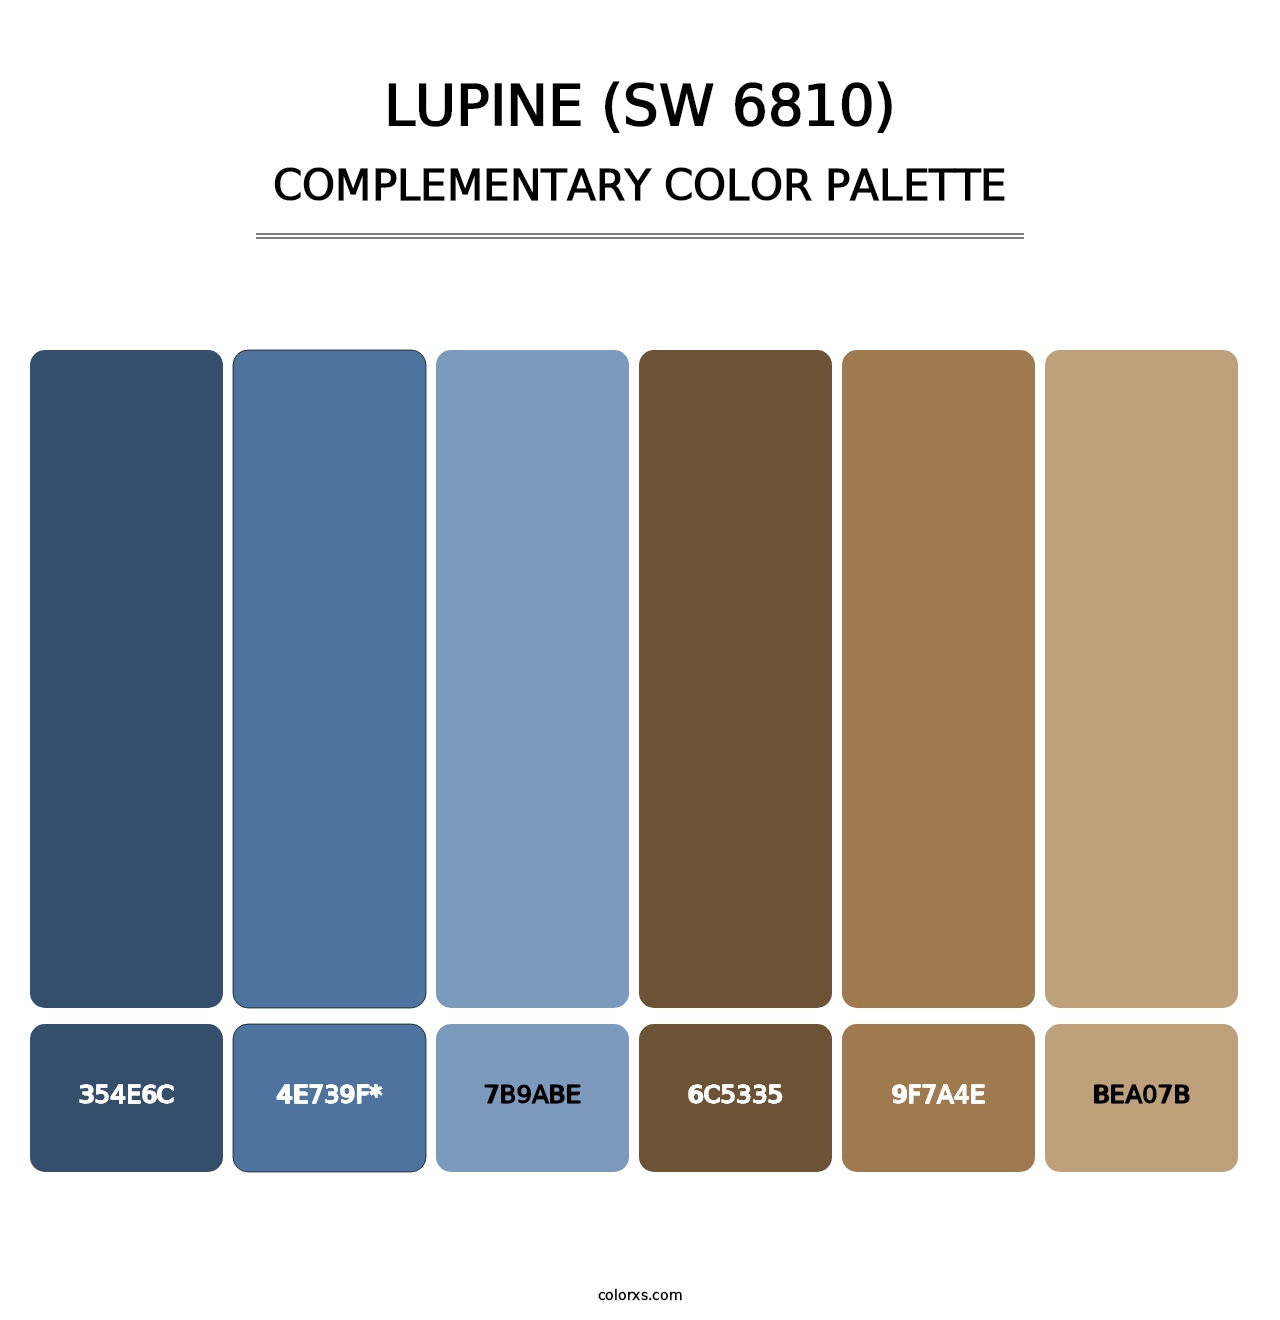 Lupine (SW 6810) - Complementary Color Palette